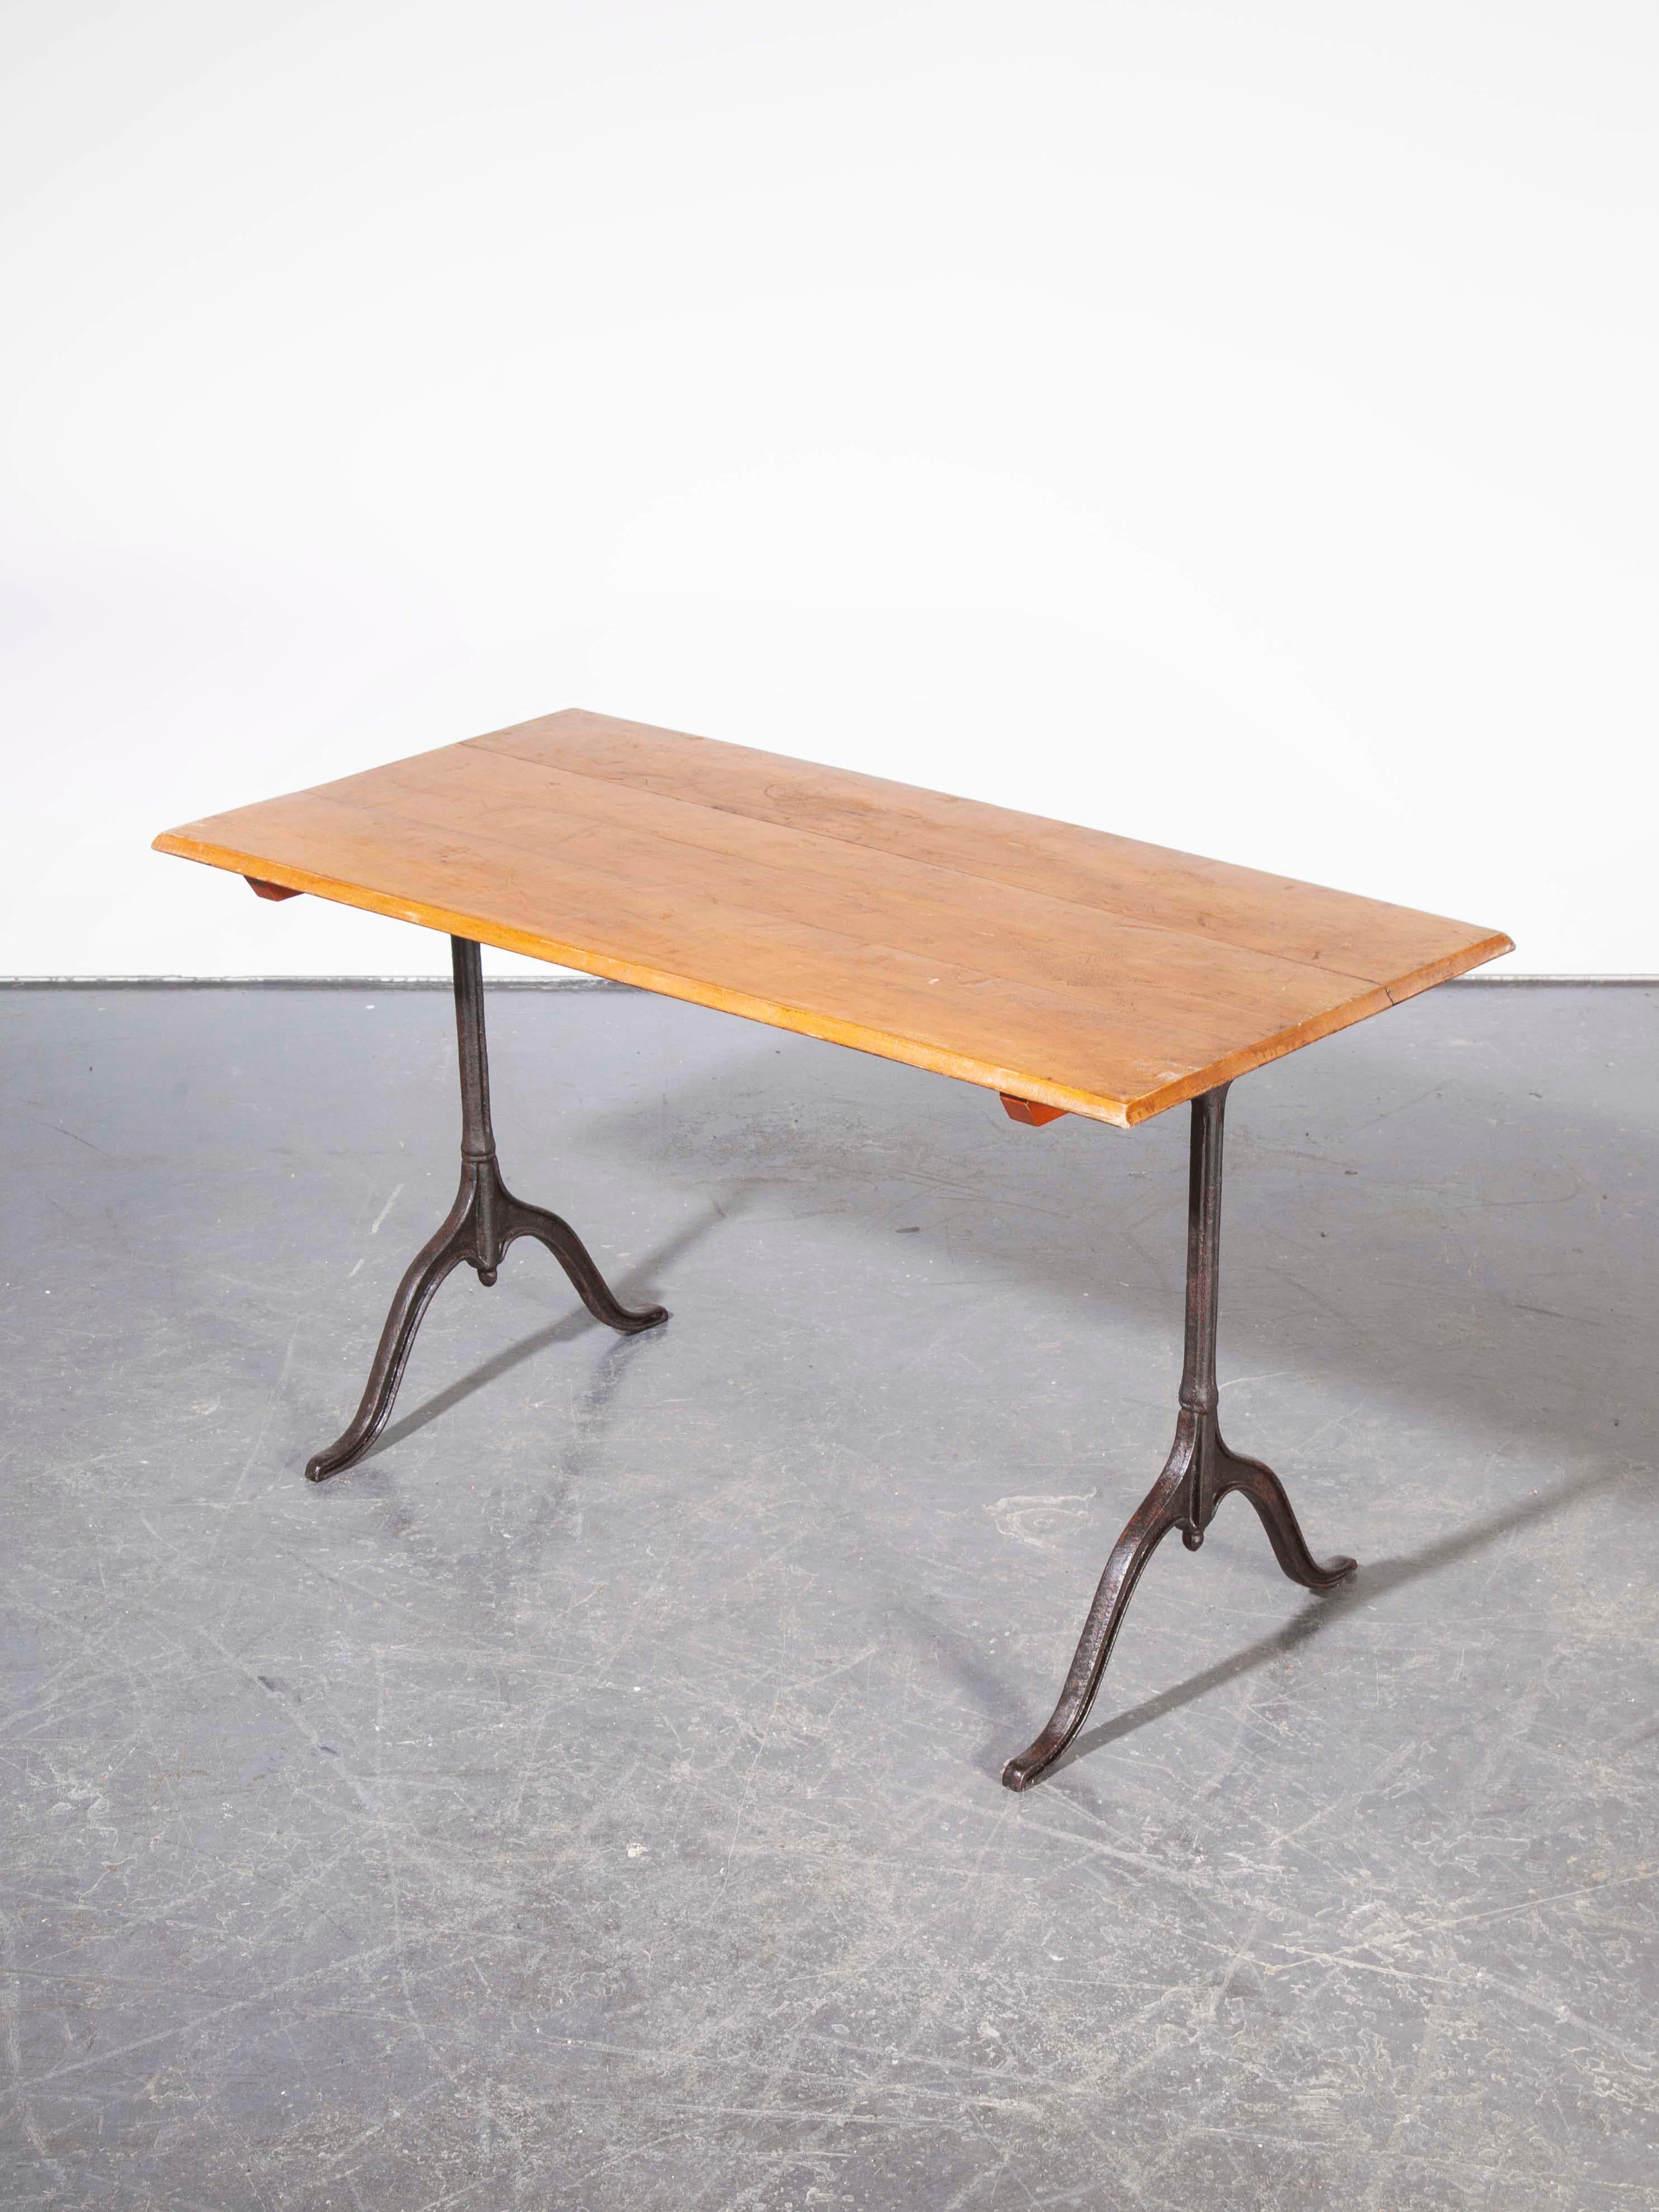 1930s cast metal base Kronenbourg café dining, bistro table, model one. Four tables are available, this is a listing for one table as photographed. Sourced from the original Kronenbourg site in Alsace, these were found languishing in a disused part